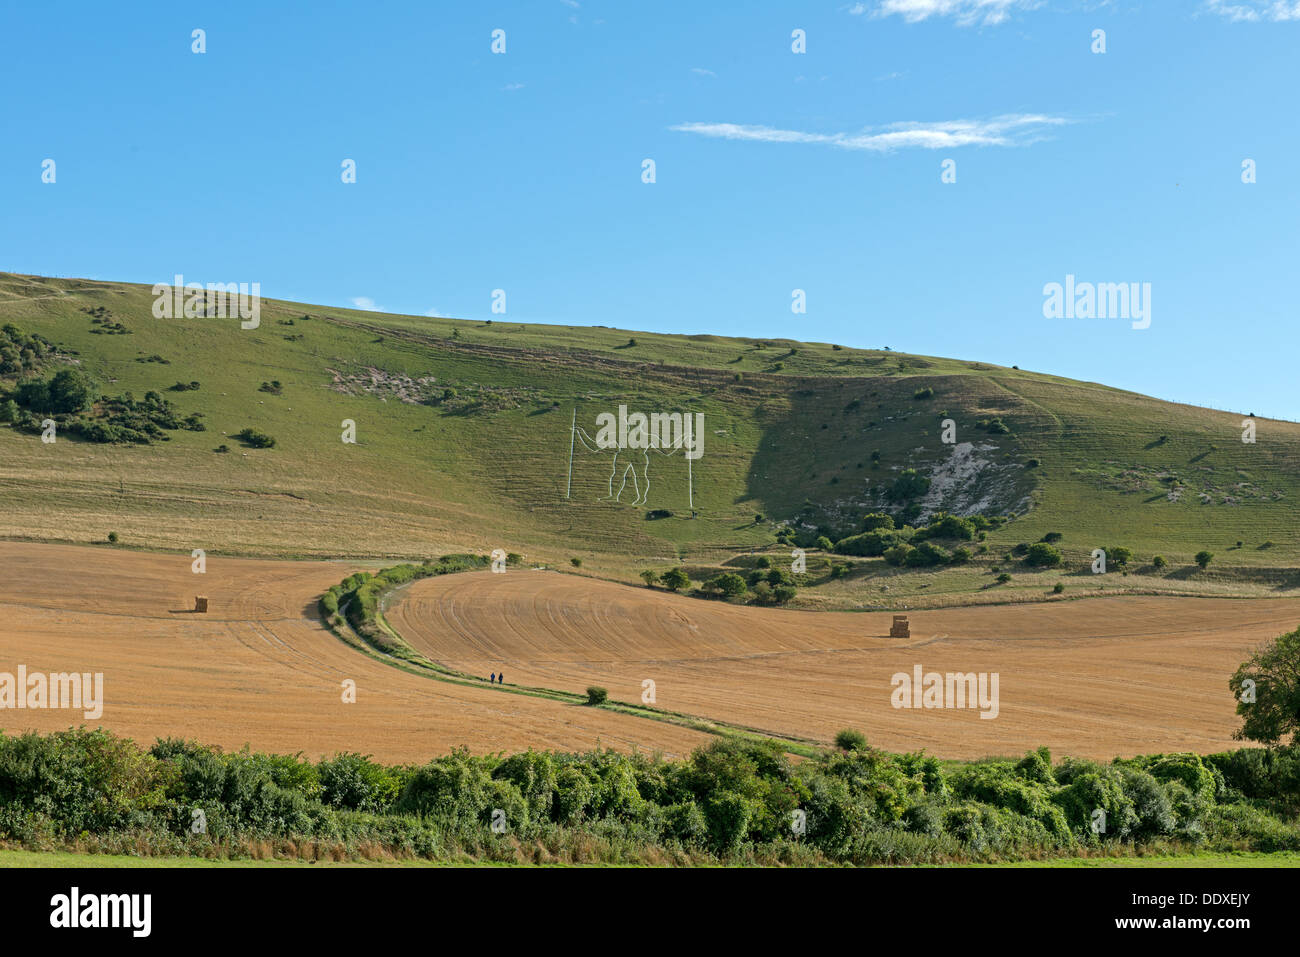 Lanscape View Of The Long Man Of Wilmington, Wilmington,East Sussex, England, Uk Stock Photo